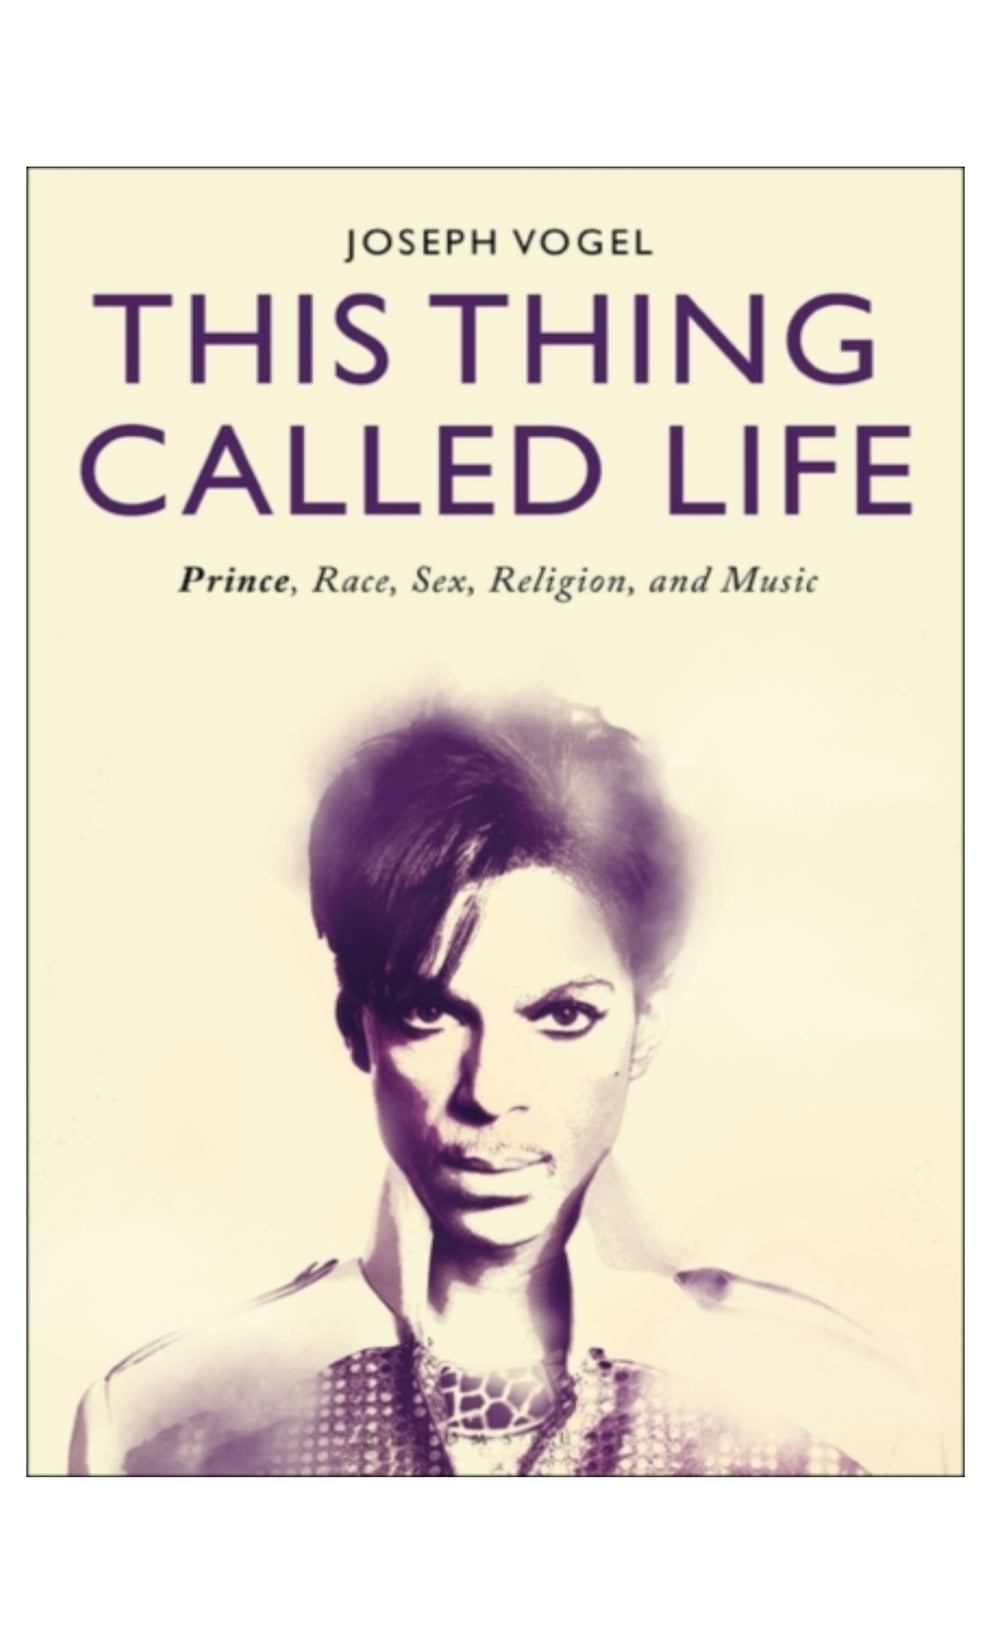 Prince – This Thing Called Life : Prince, Race Sex Religion Music by Joseph Vogel Book HB: NEW